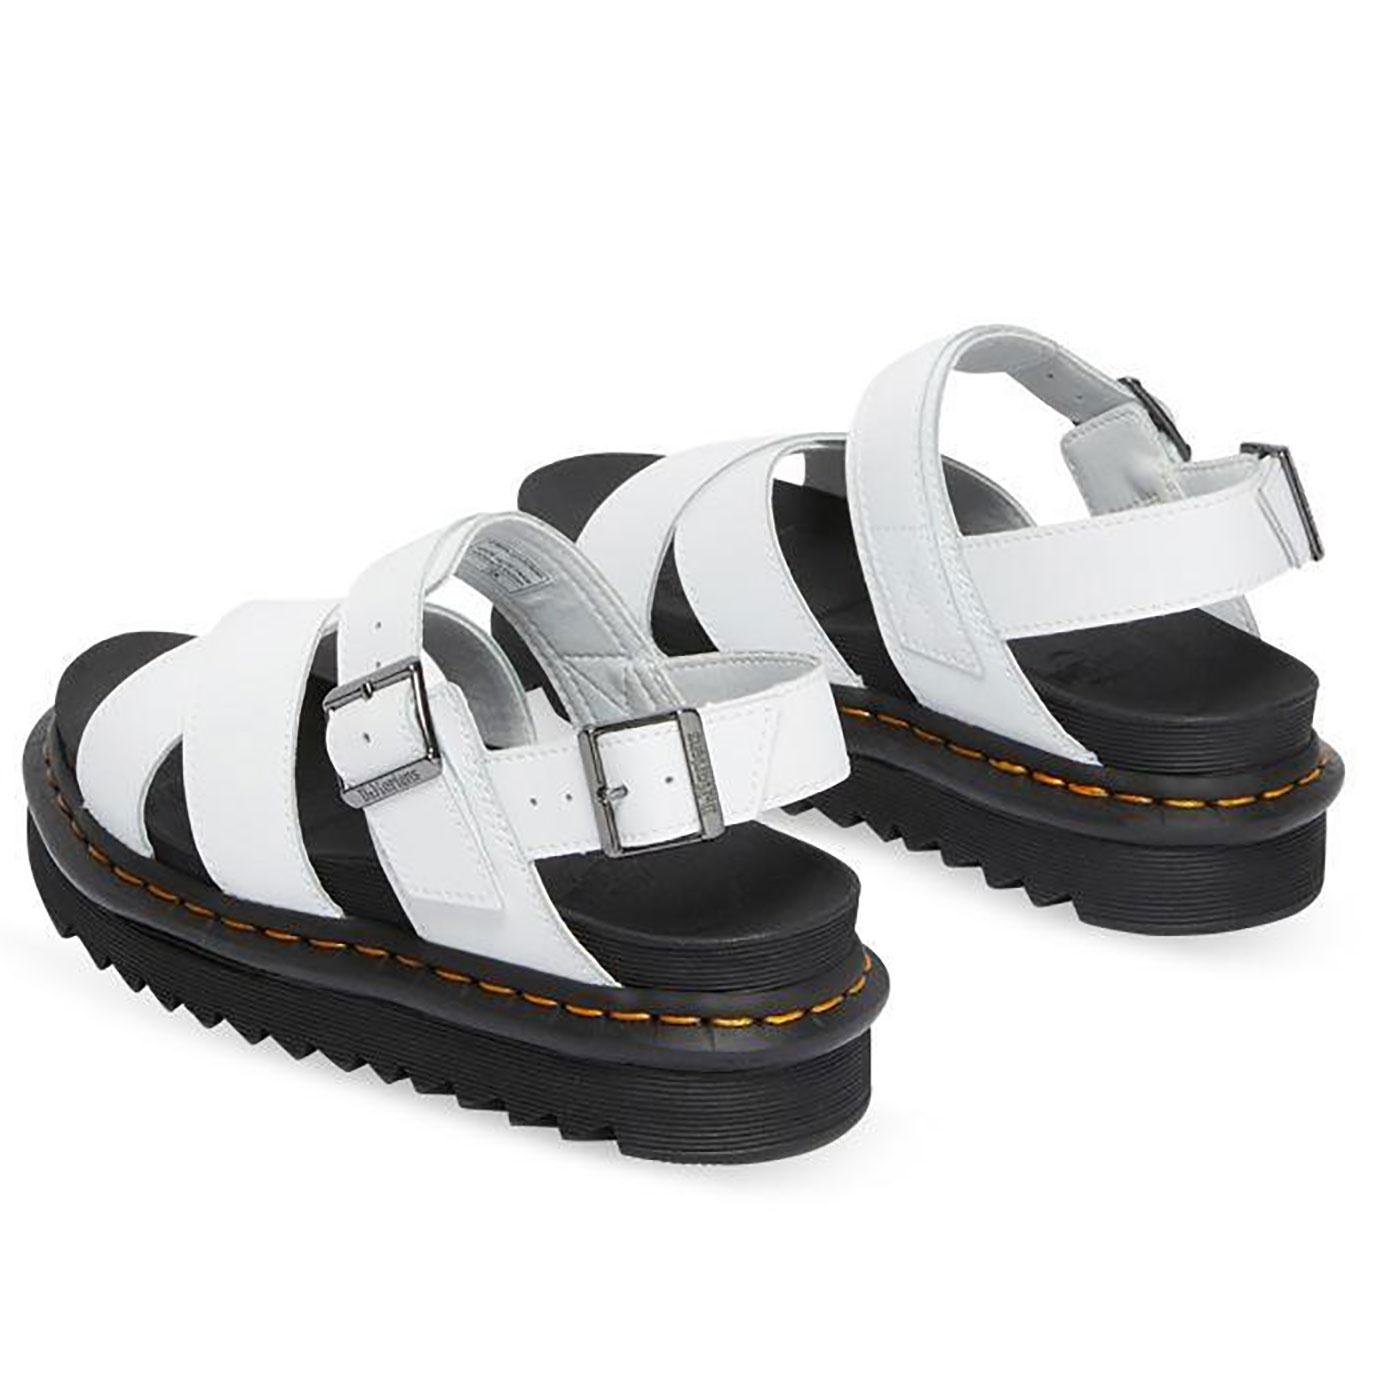 DR MARTENS Voss II Womens Hydro Leather Sandals White